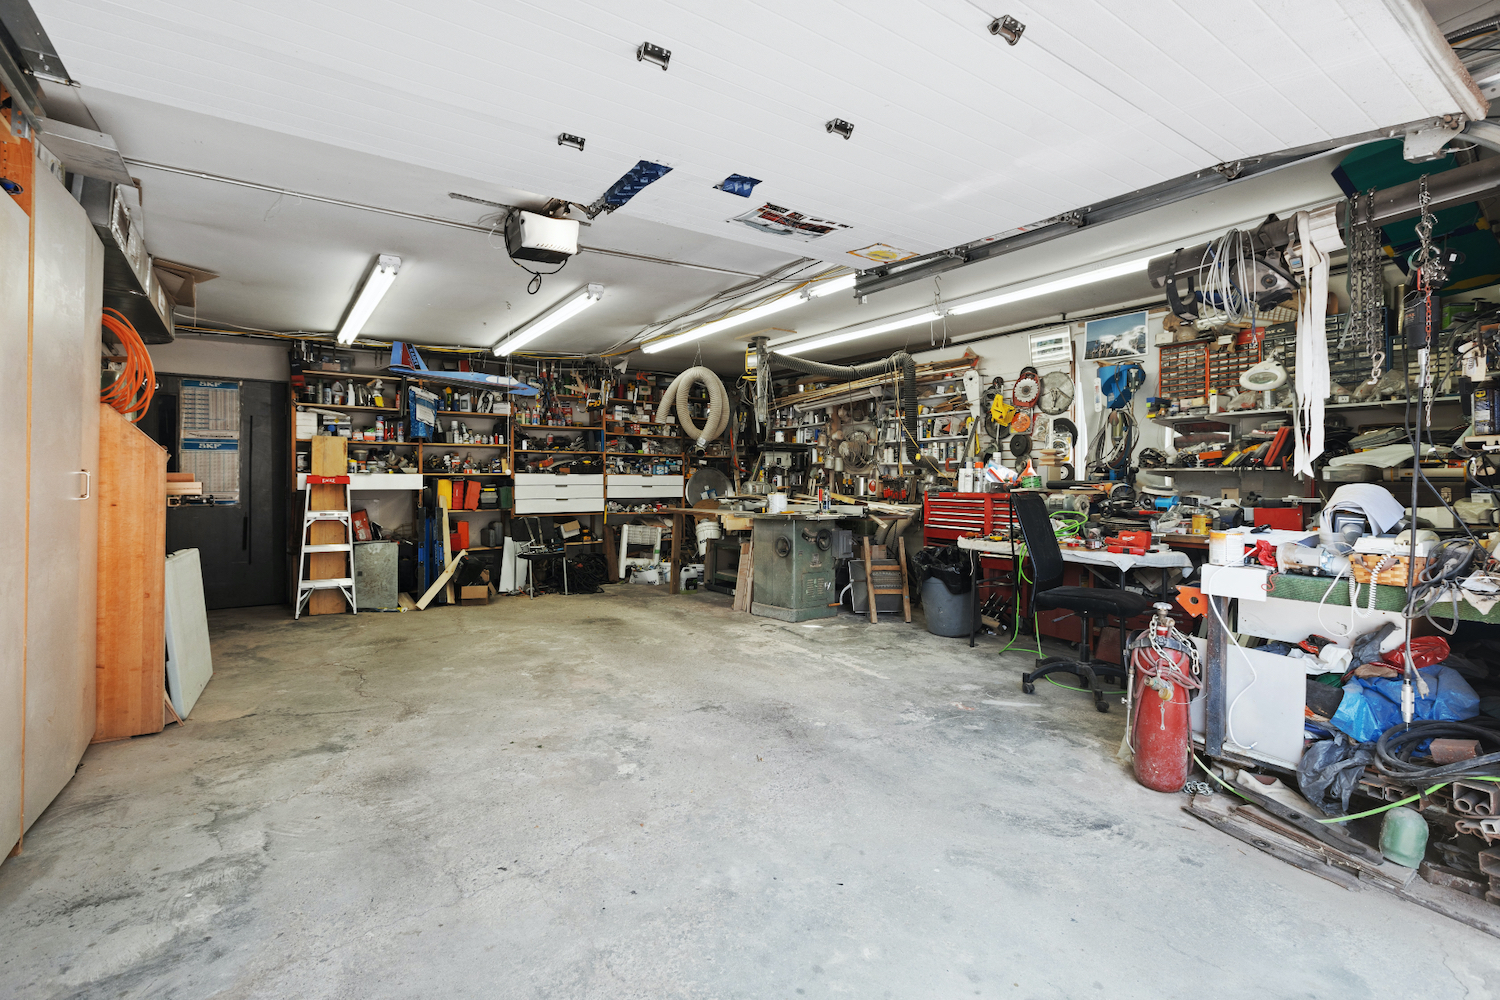 Simple garage organization tips for better car and motorcycle care